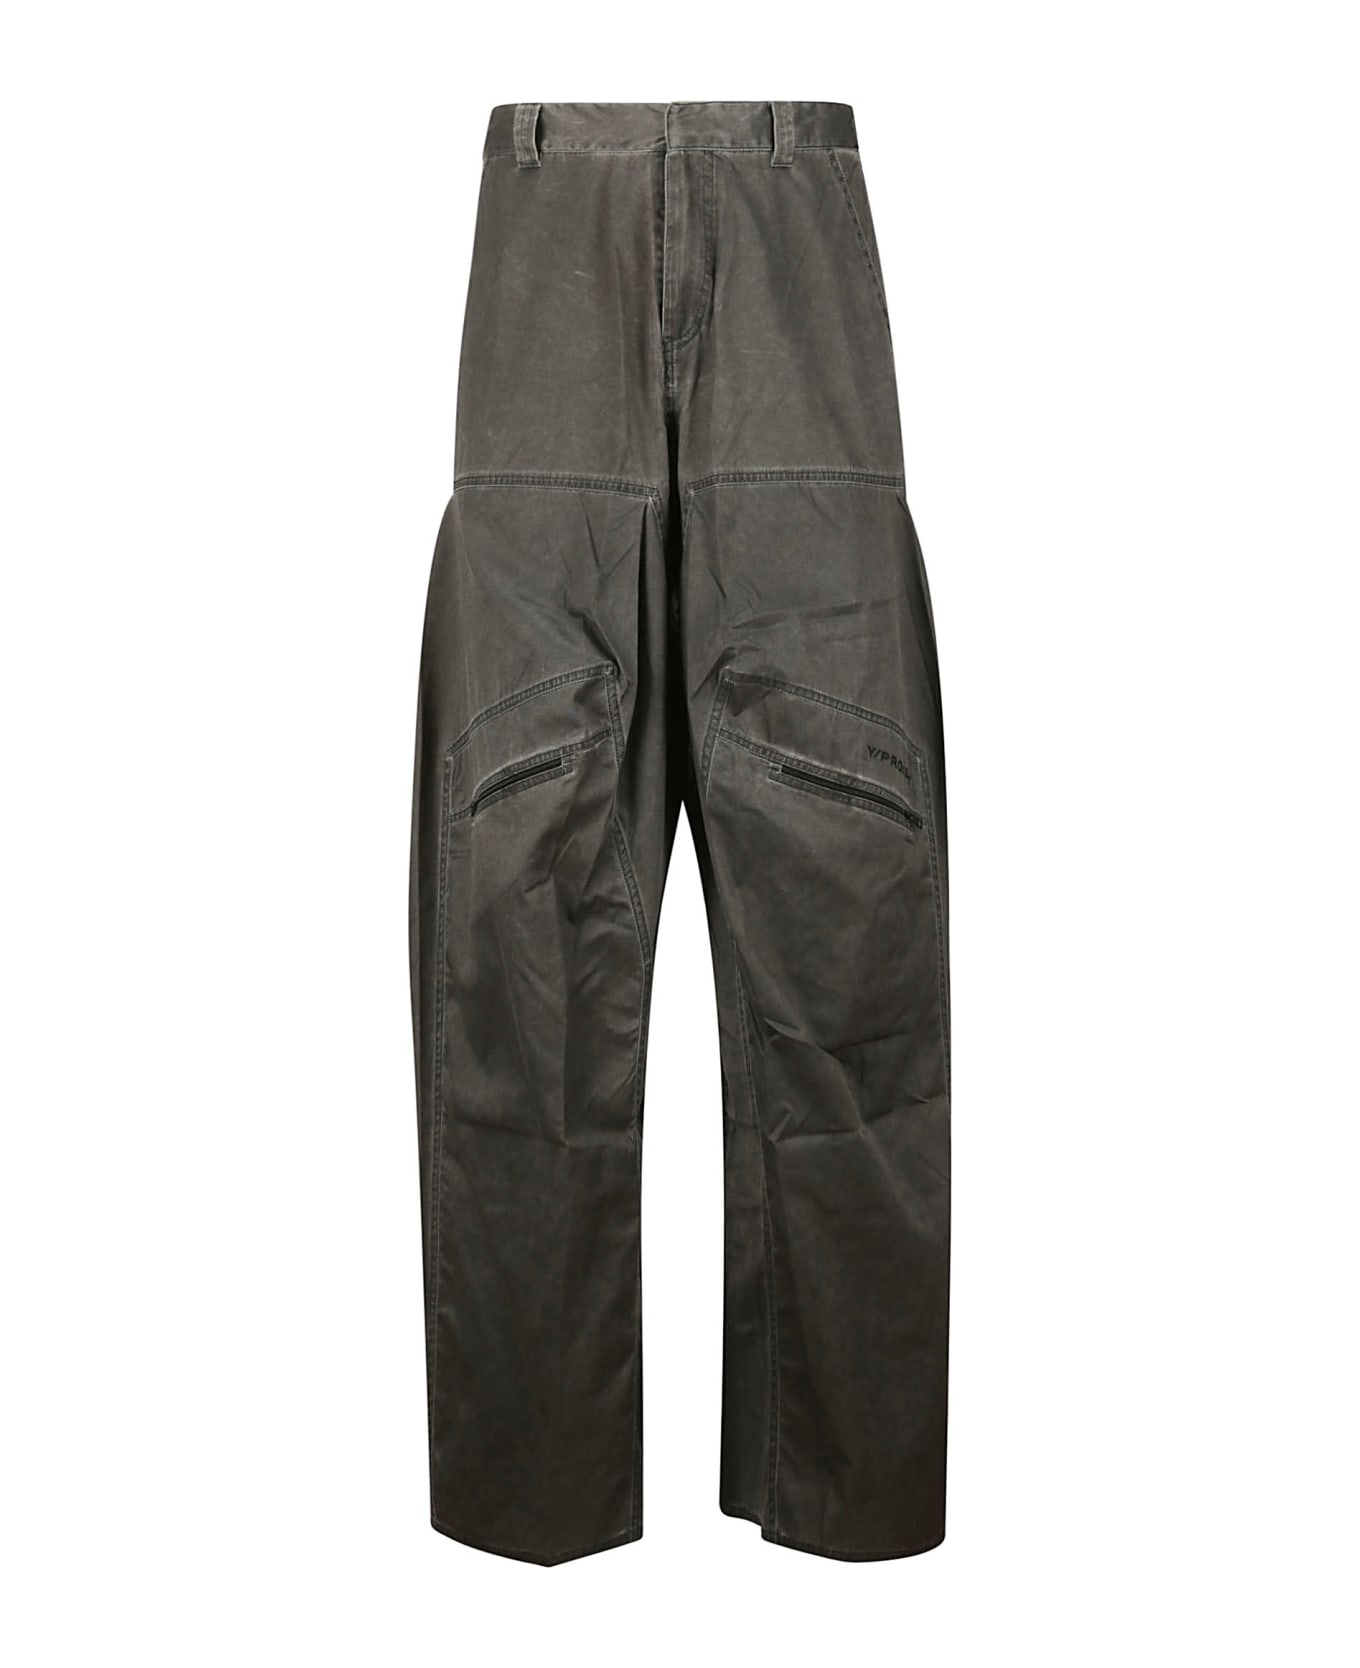 Y/Project Pop-up Pants - WASHED BLACK ボトムス